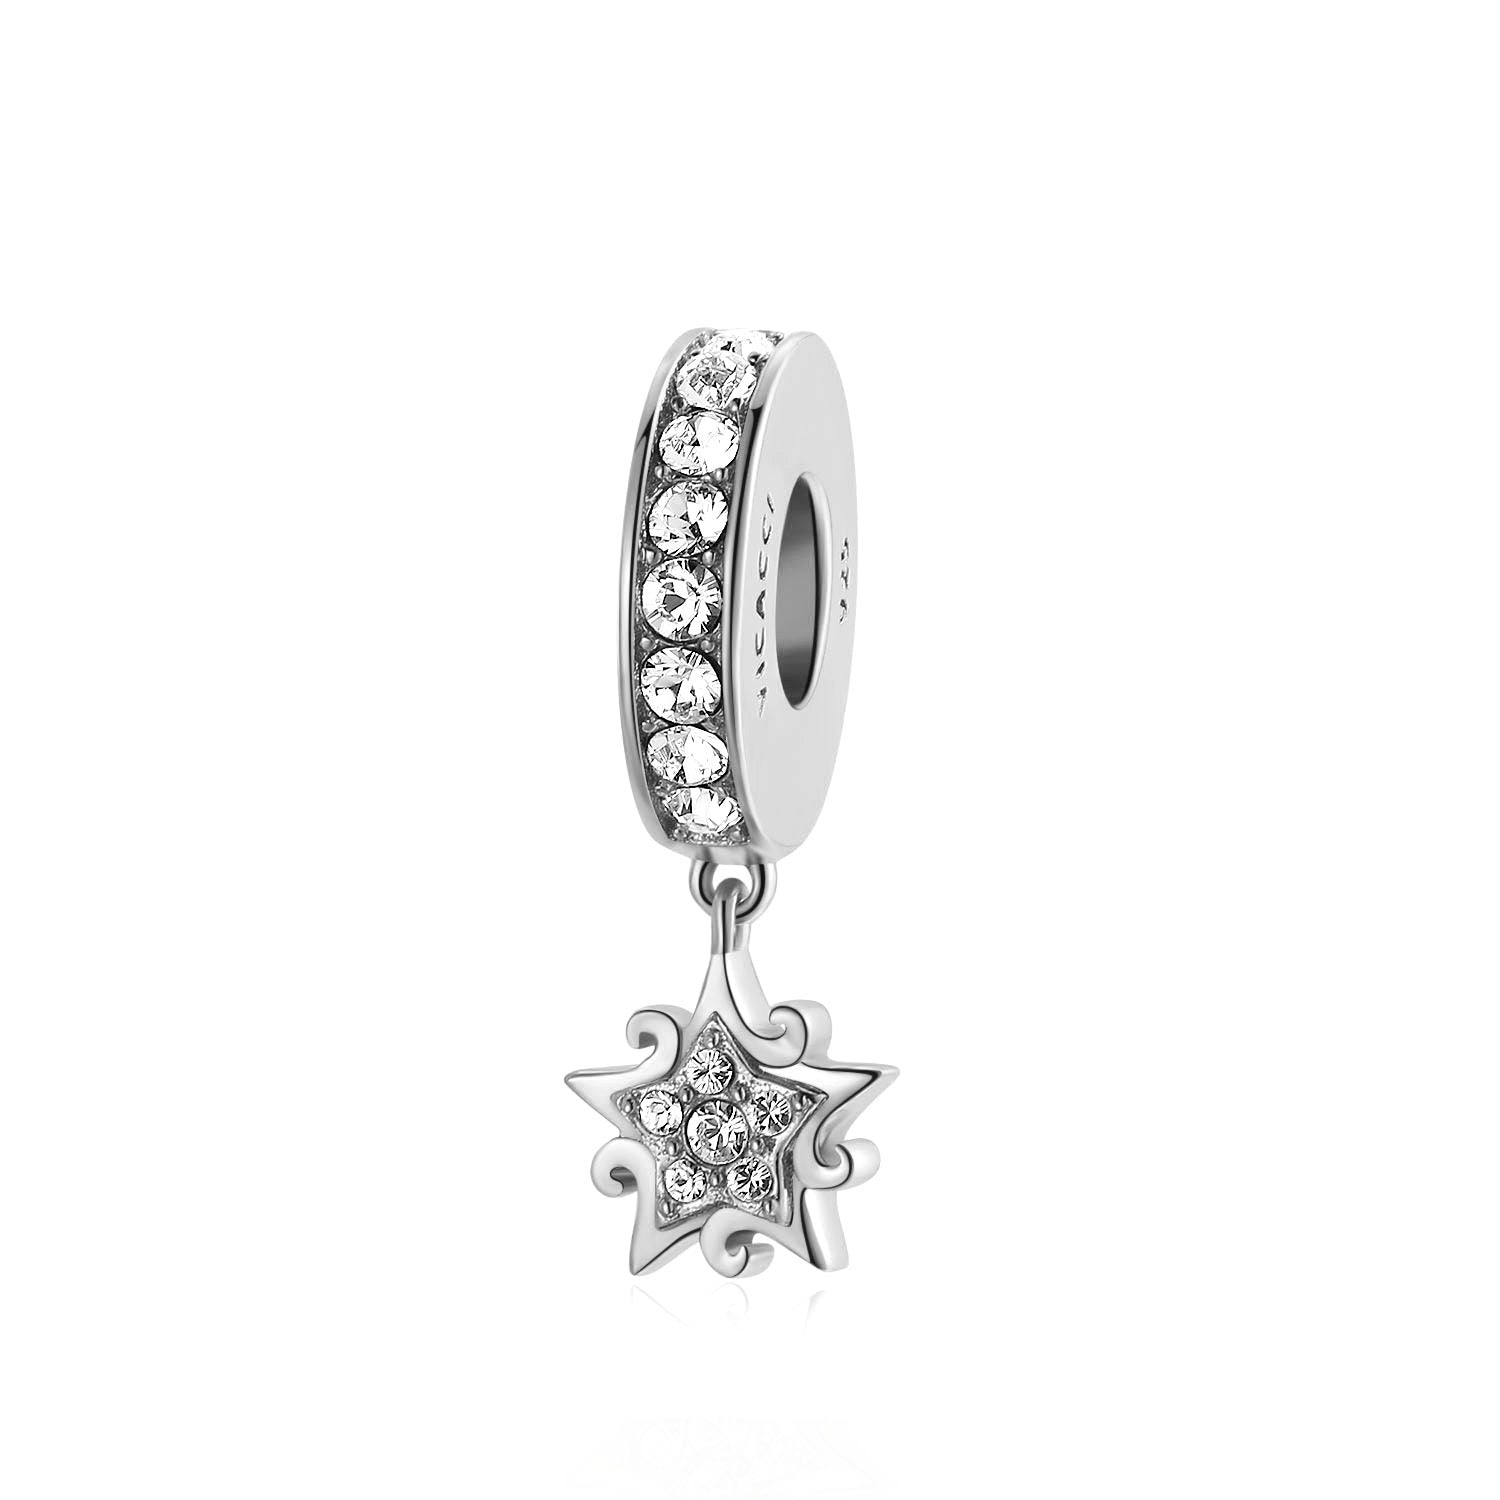 Star Glow 925 silver beads with white gold plating